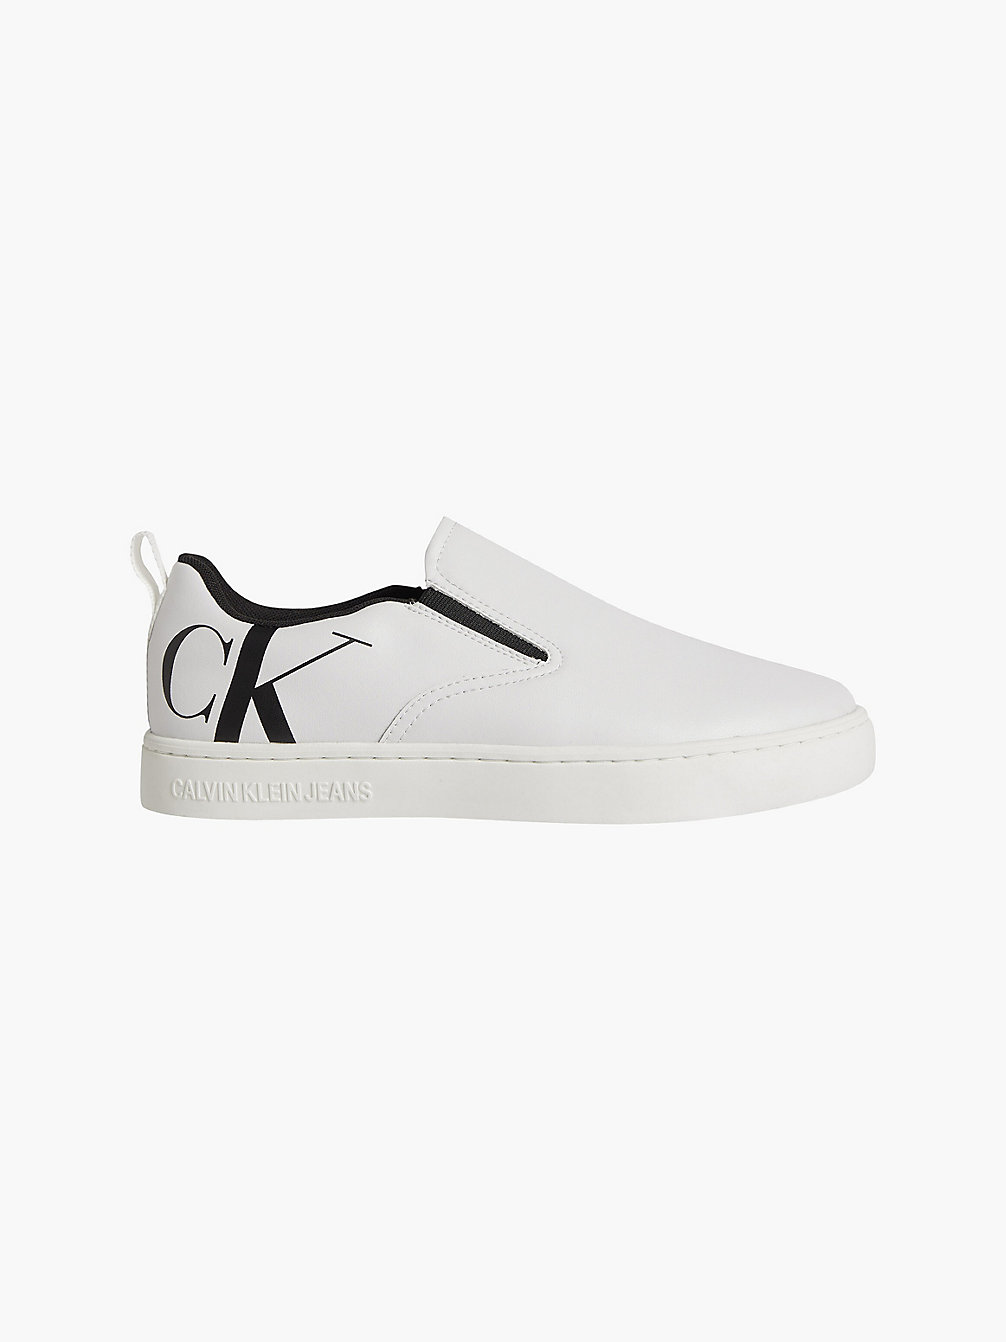 BRIGHT WHITE Leather Slip-On Shoes undefined men Calvin Klein